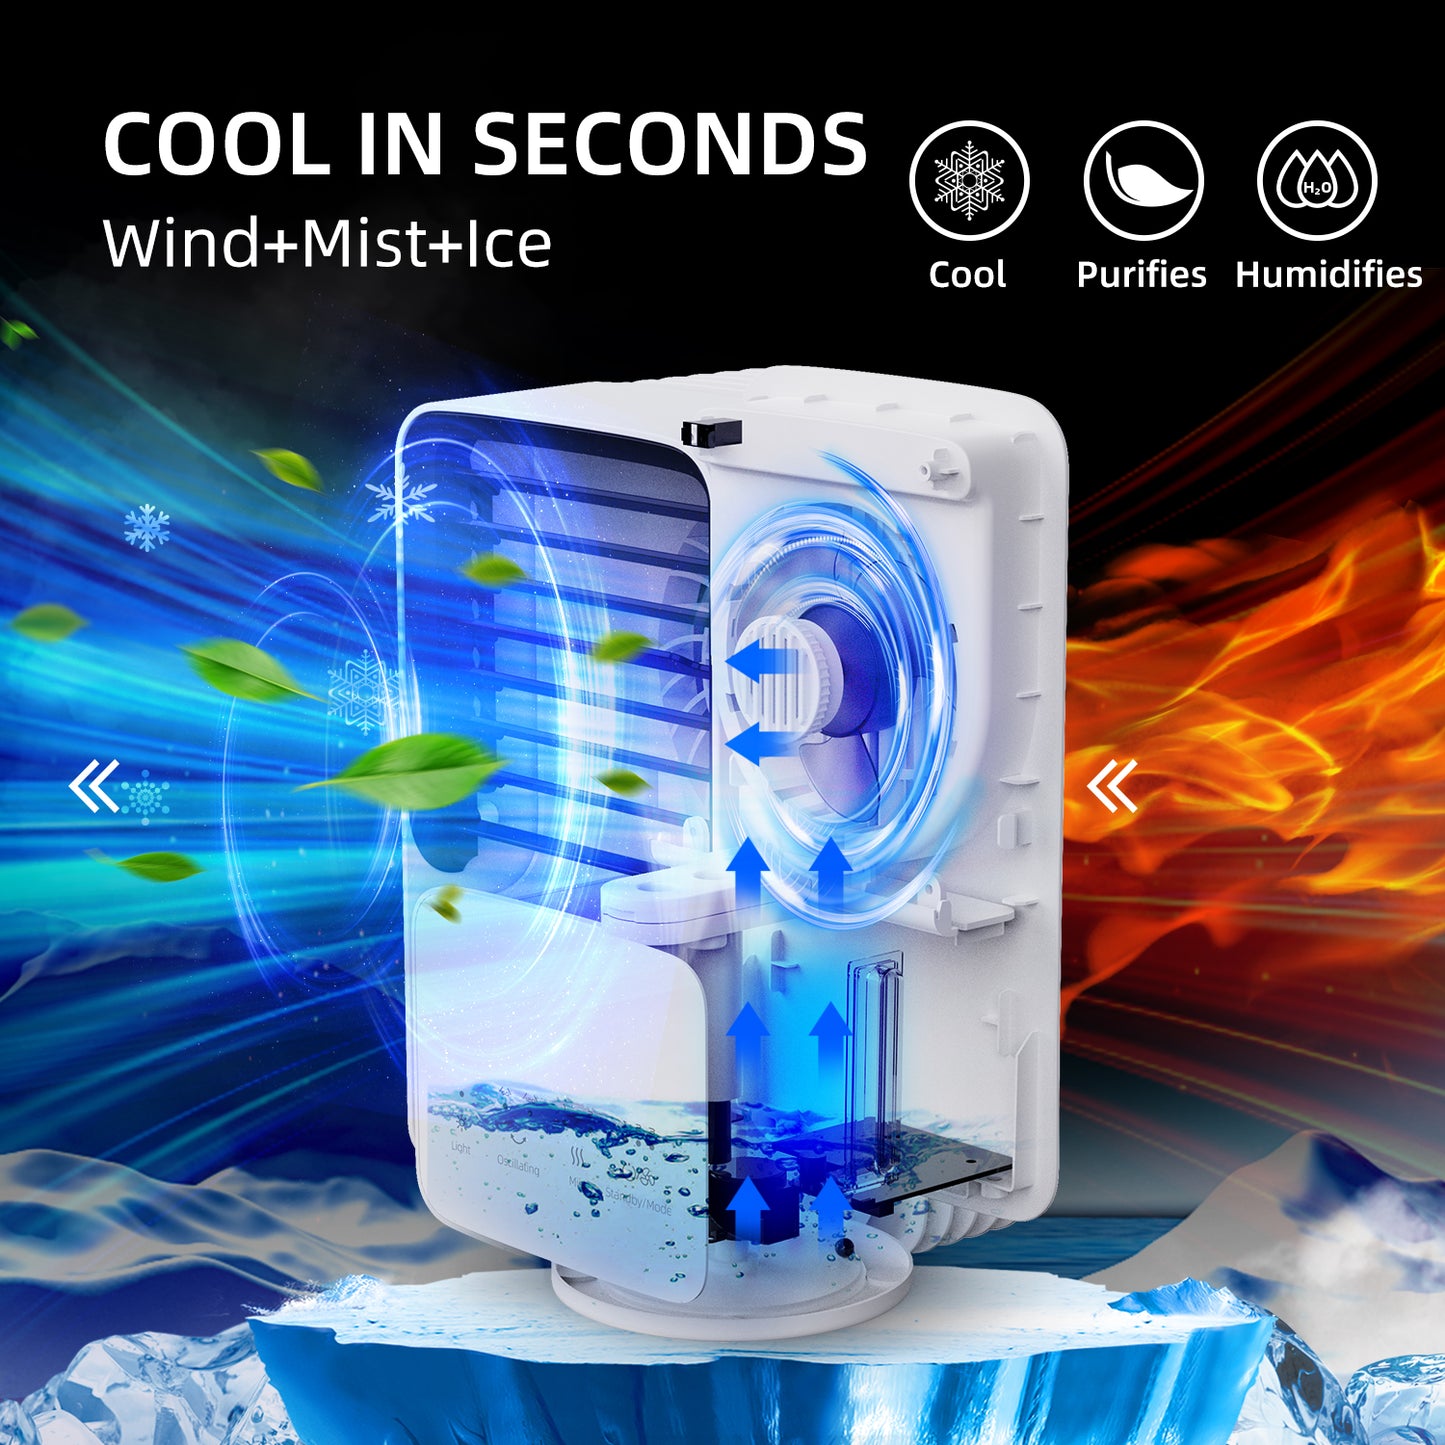 KLOUDIC Portable Air Conditioner Fan, Evaporative Air Cooler, USB Personal Desktop Cooling Fan with 3 Speeds,Small Air Cooler for Room